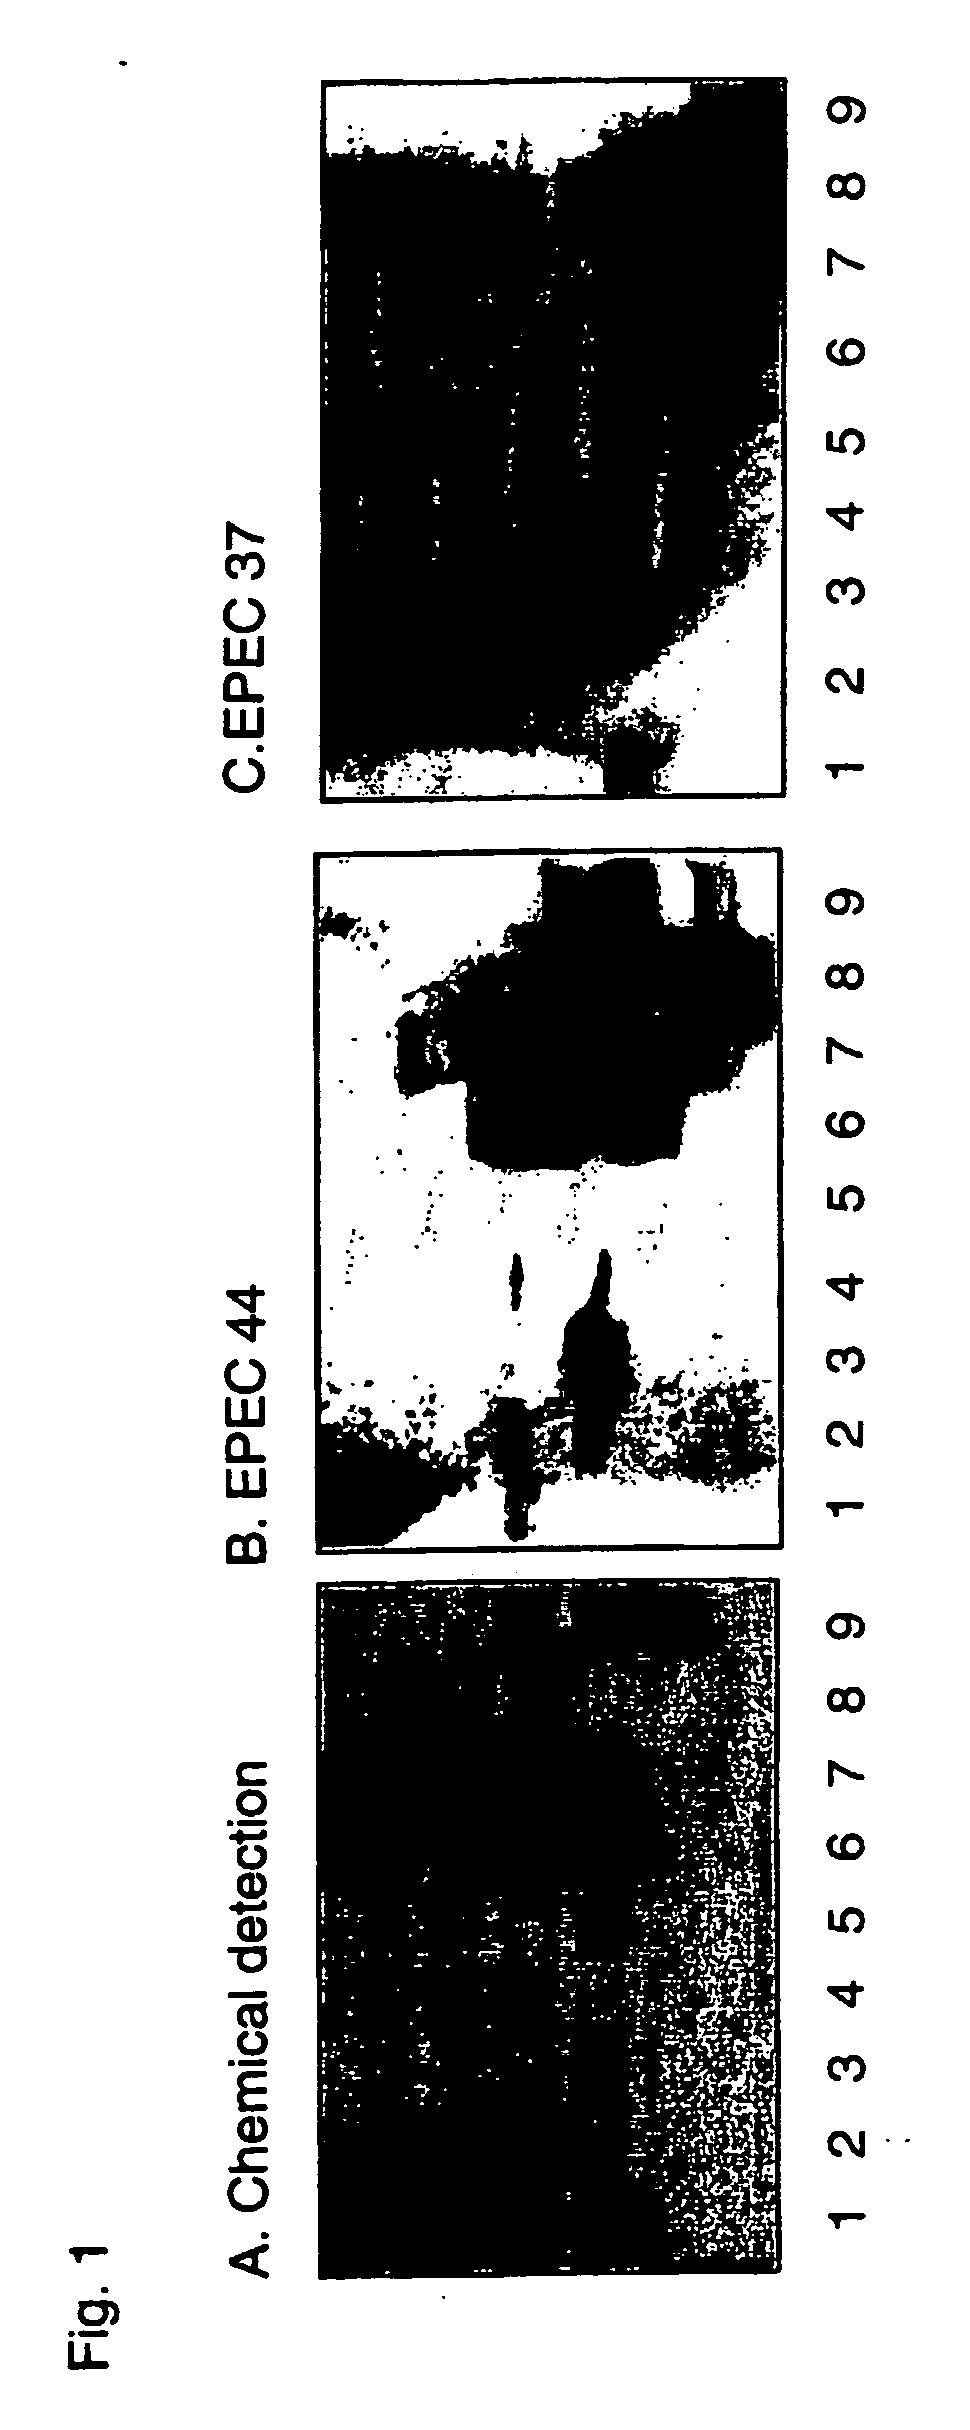 Therapeutic compositions for use in prophylaxis or treatment of diarrheas